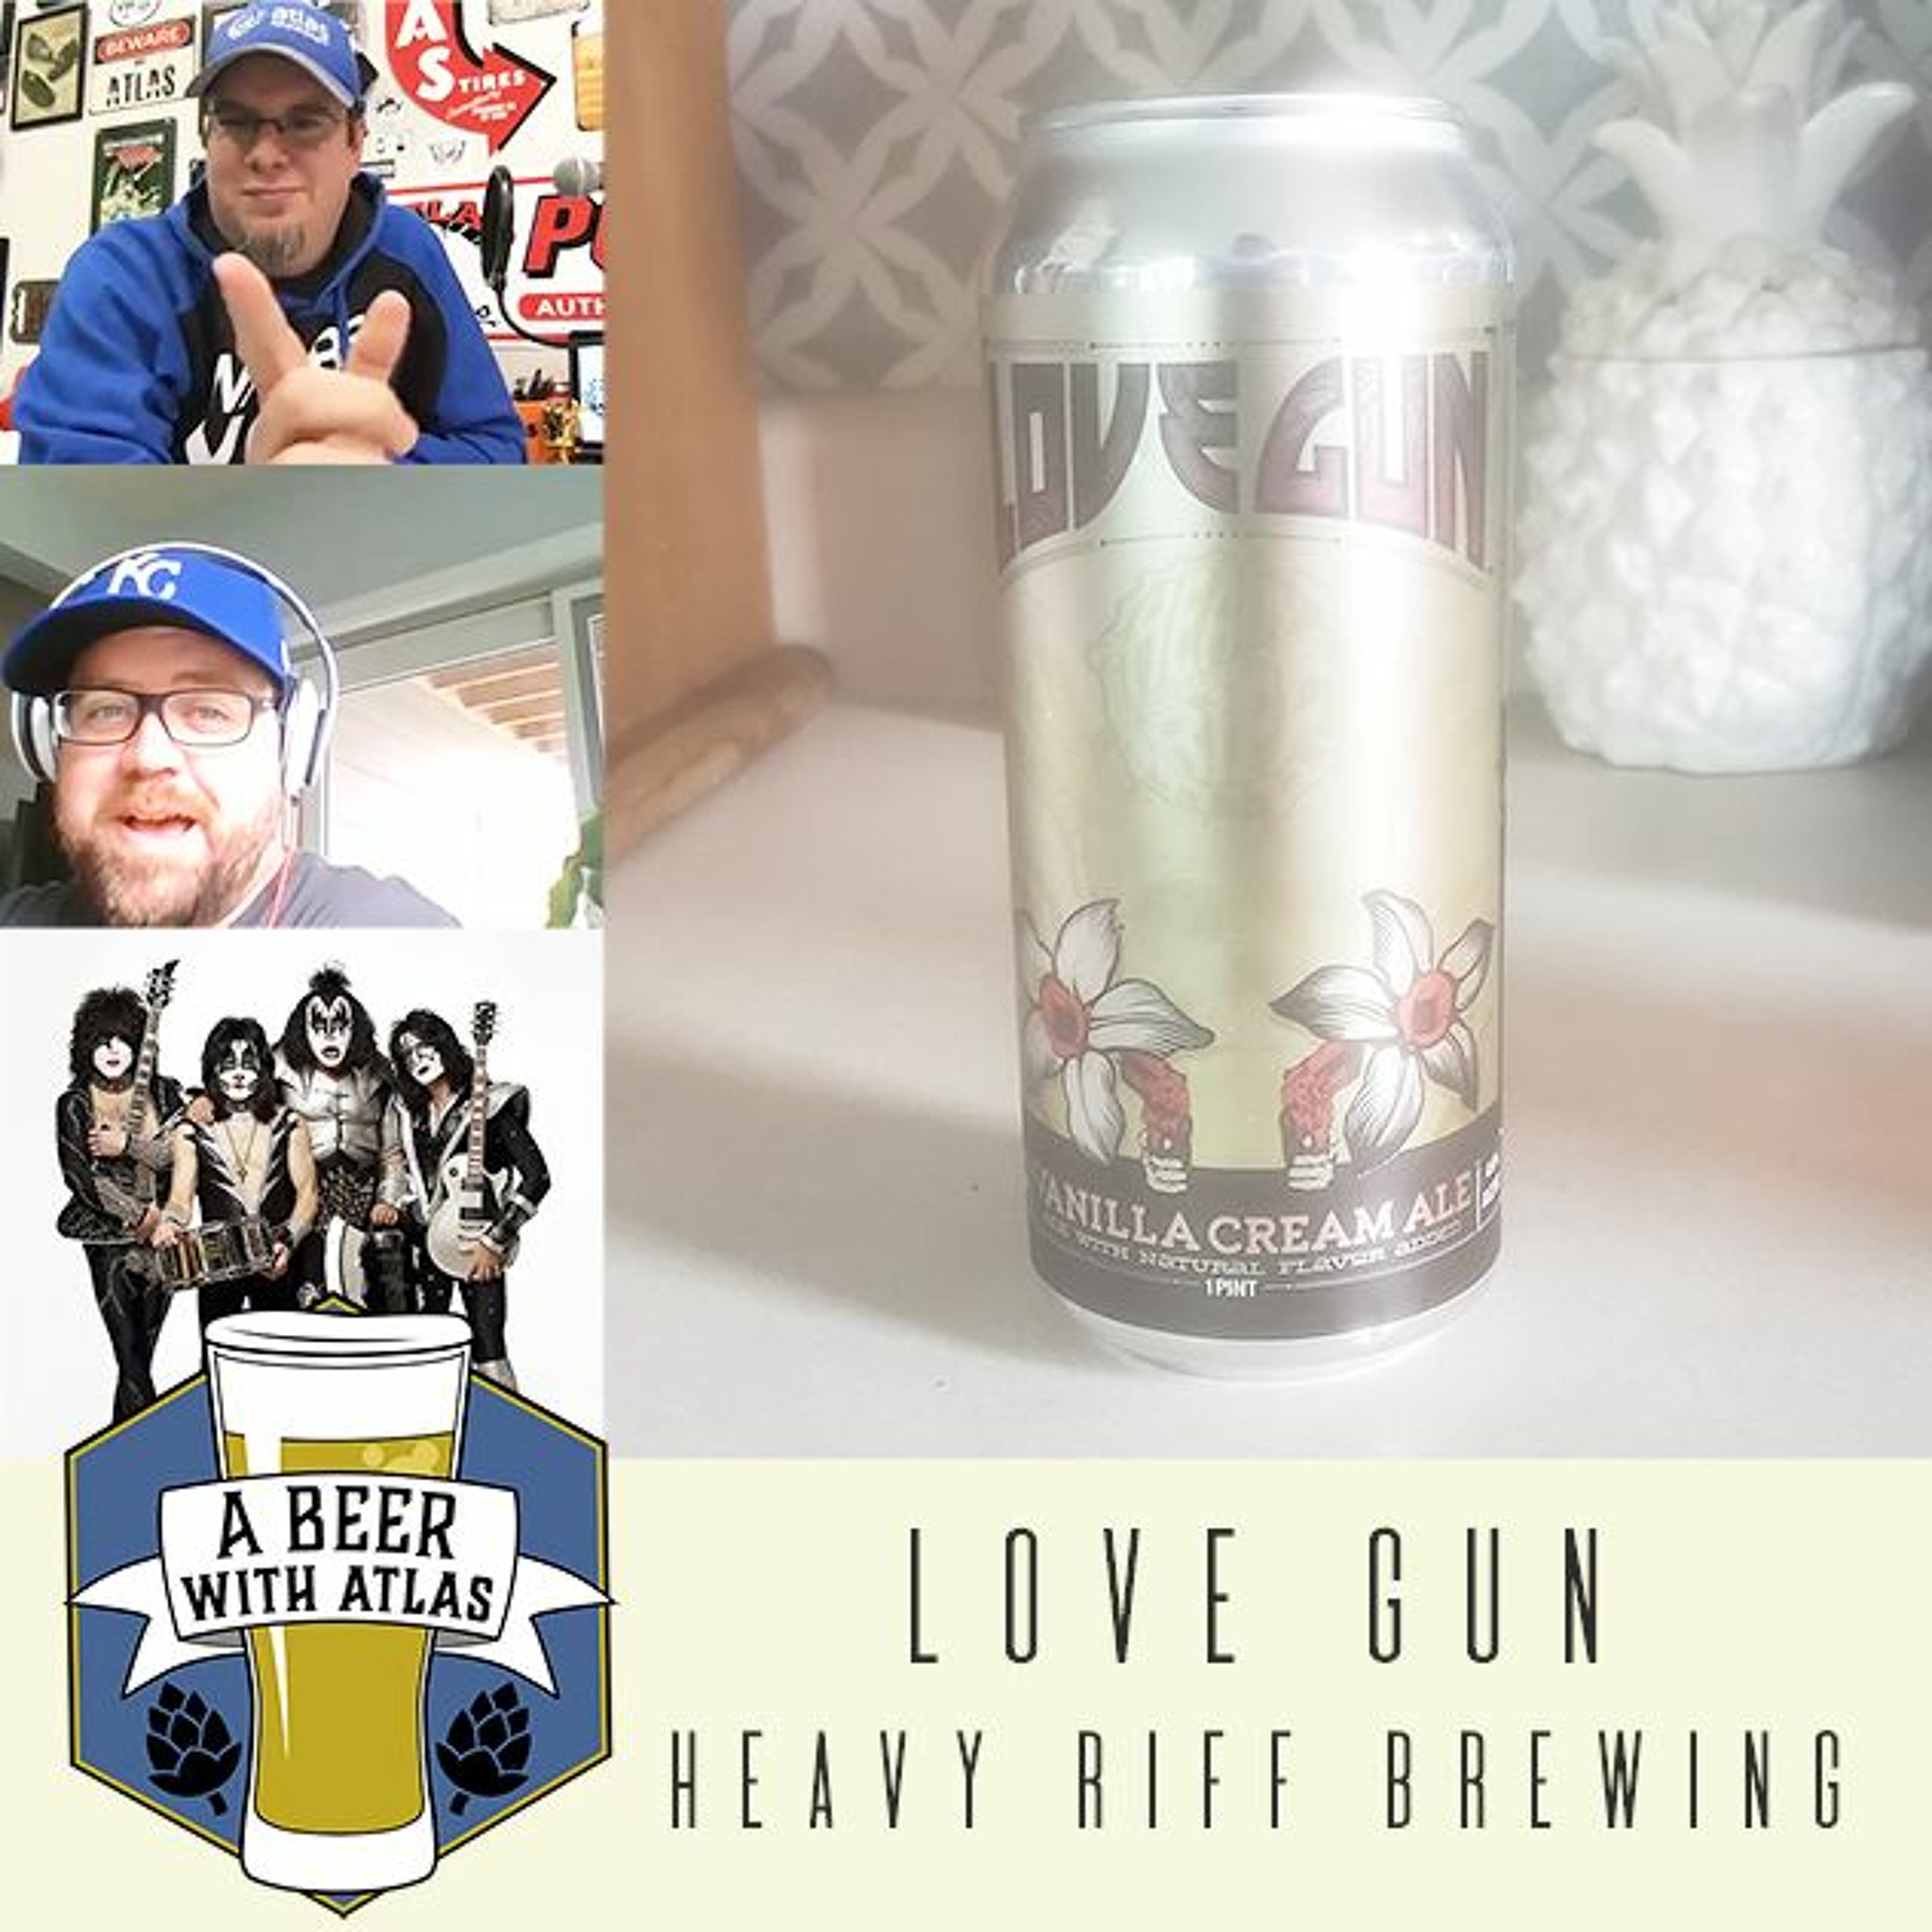 Beer With Atlas 94 - Love Gun Heavy Riff Brewing Company